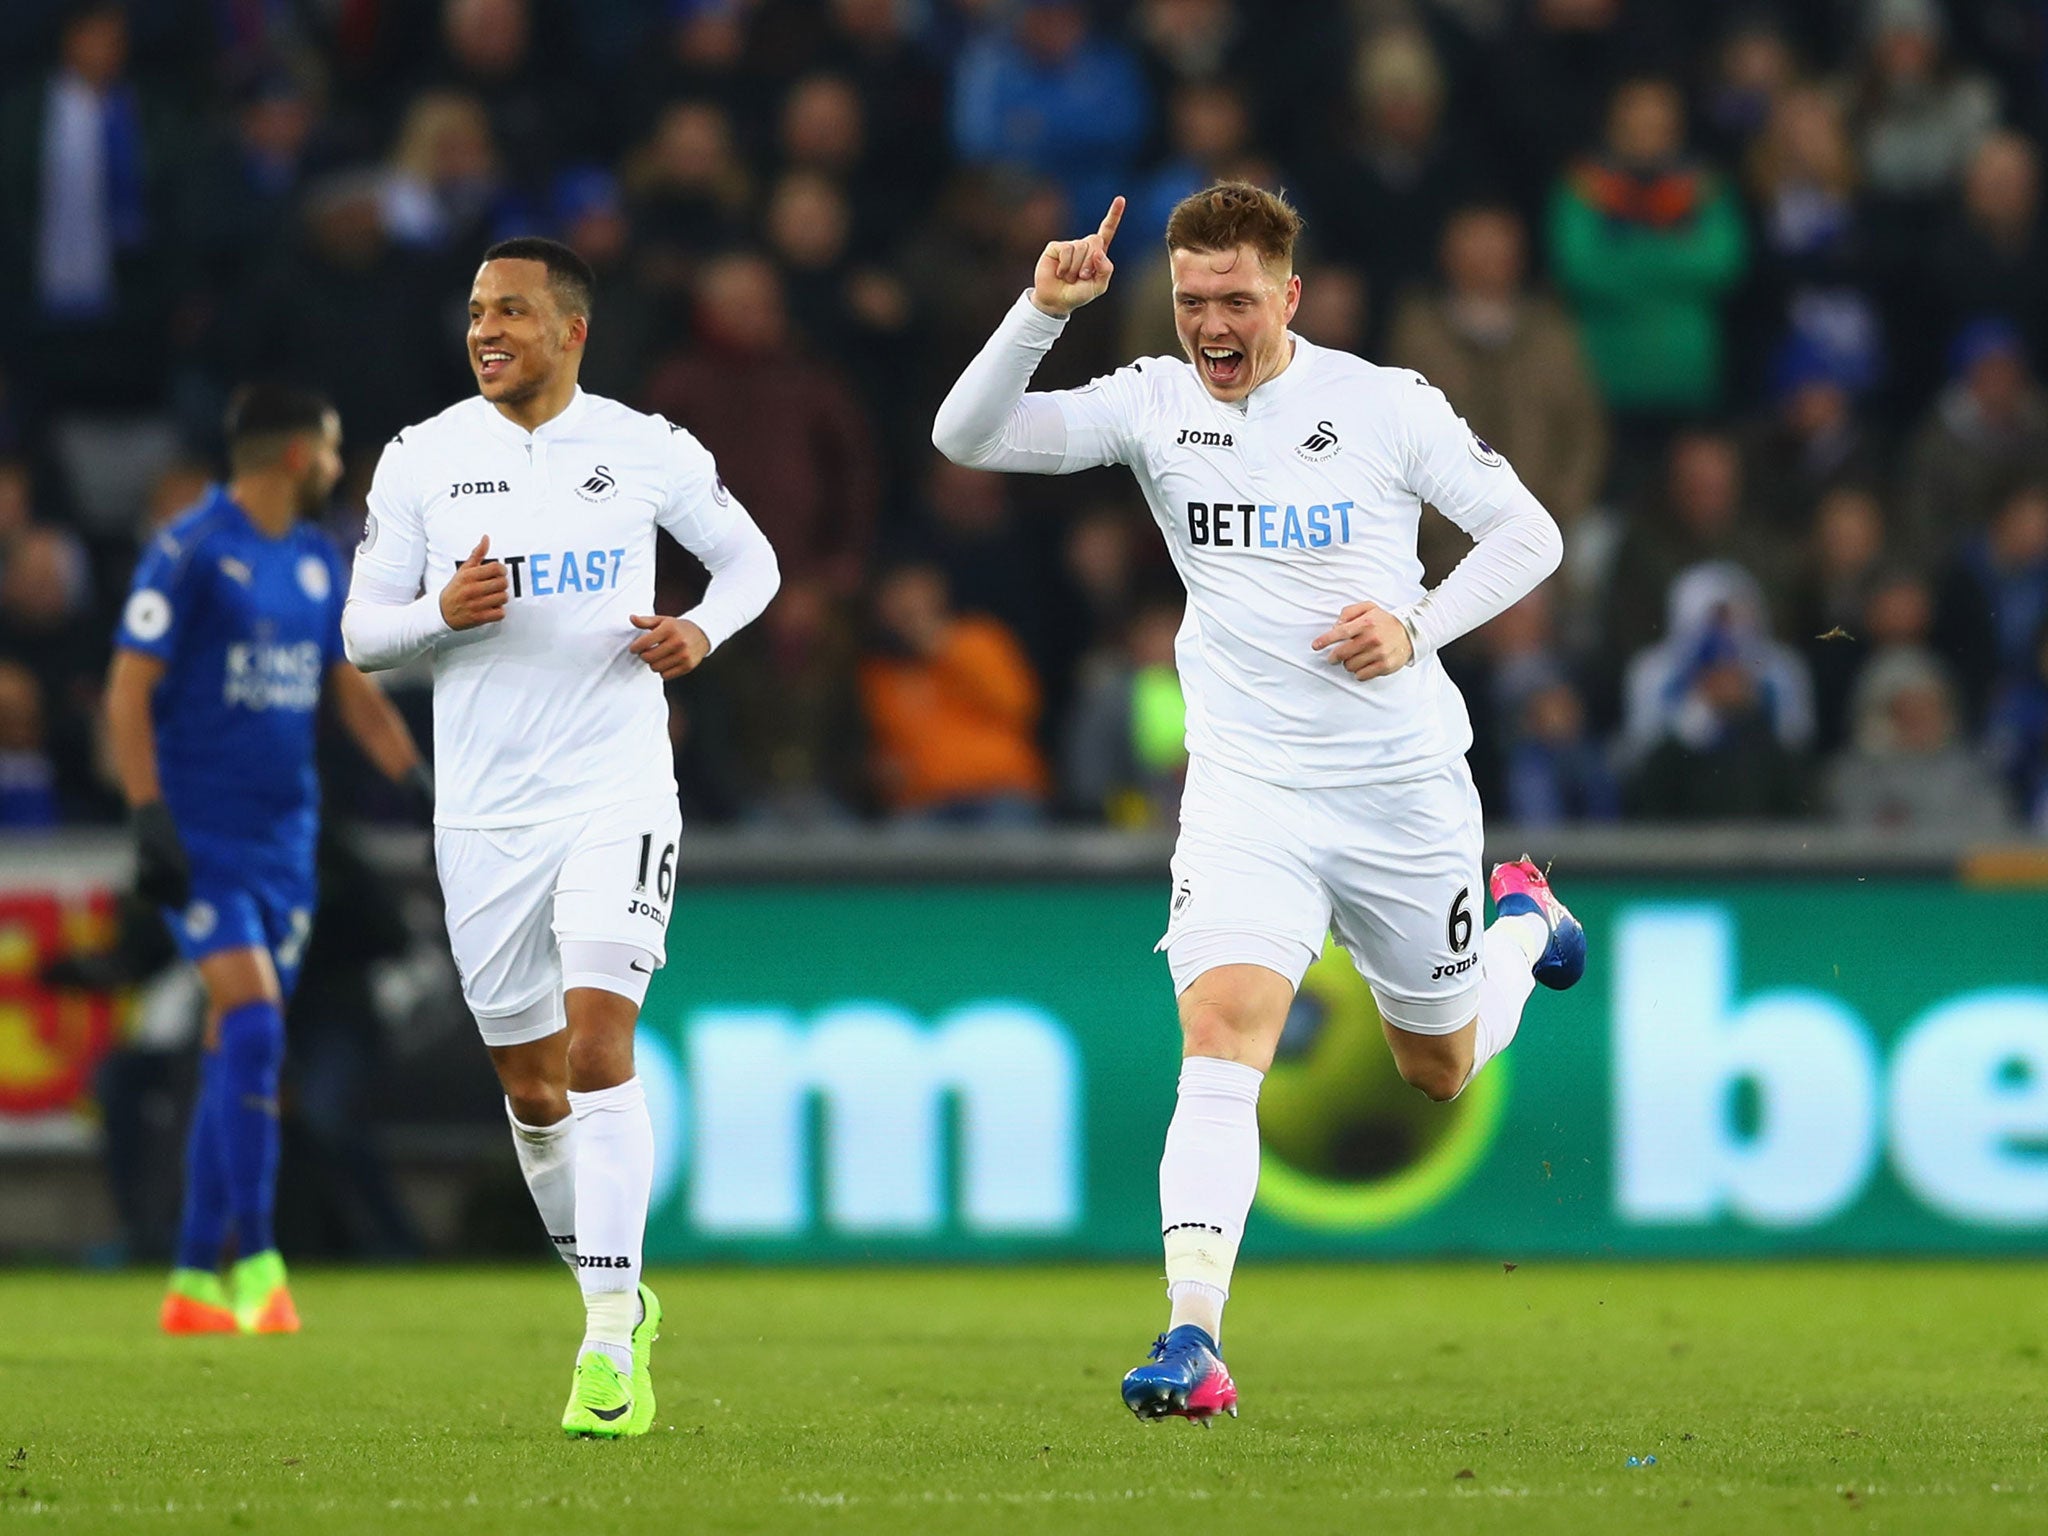 Swansea clinched an important three points to move away from the relegation zone